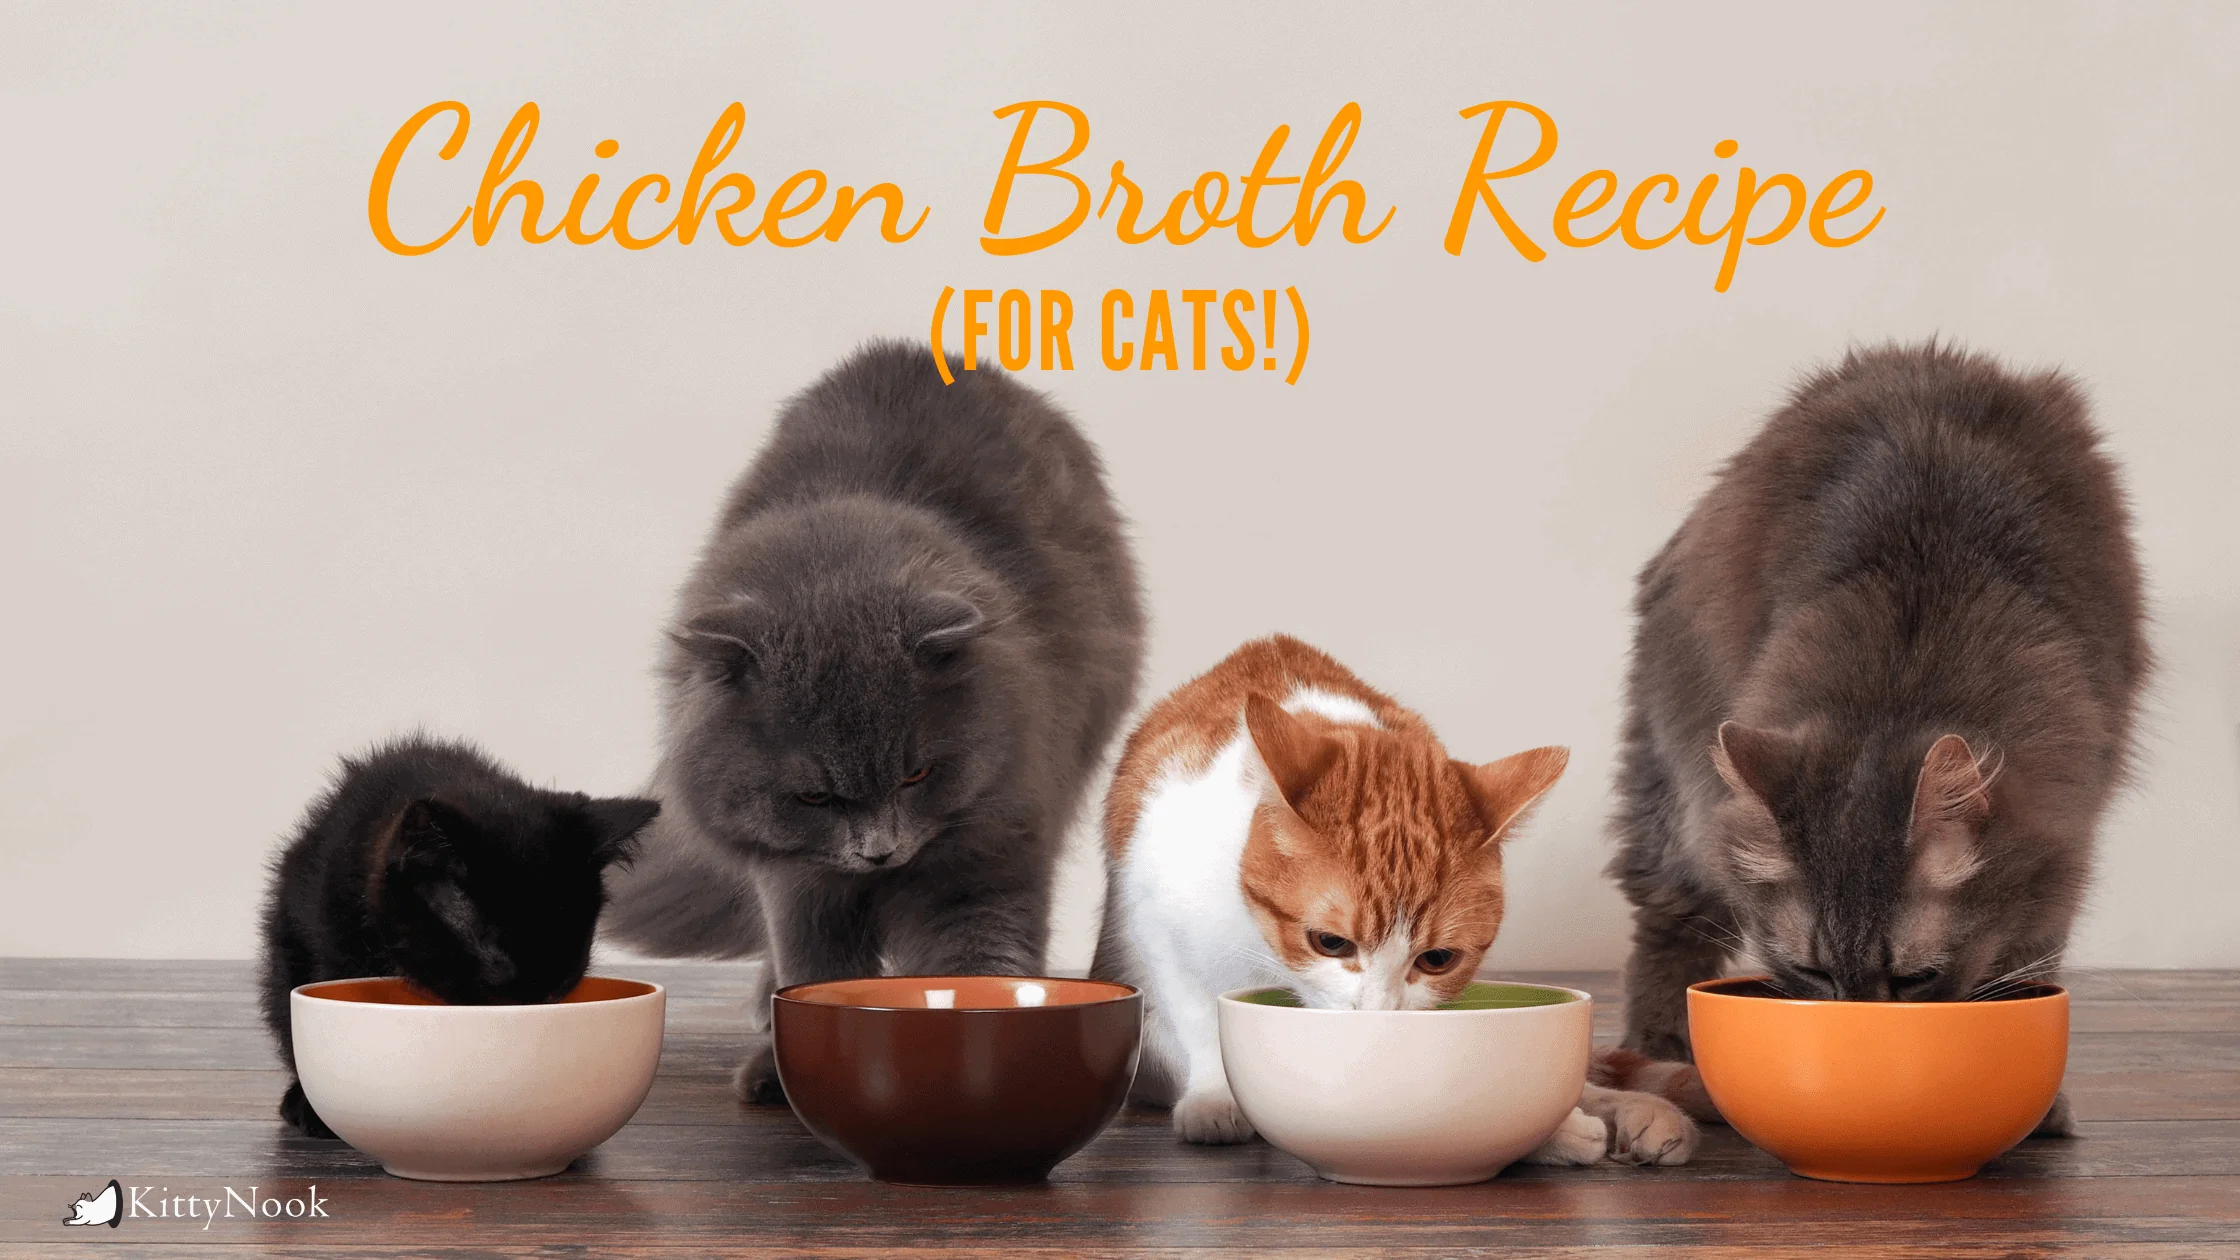 Chicken Soup As Cat Food? Know This Recipe Now! - KittyNook Cat Company